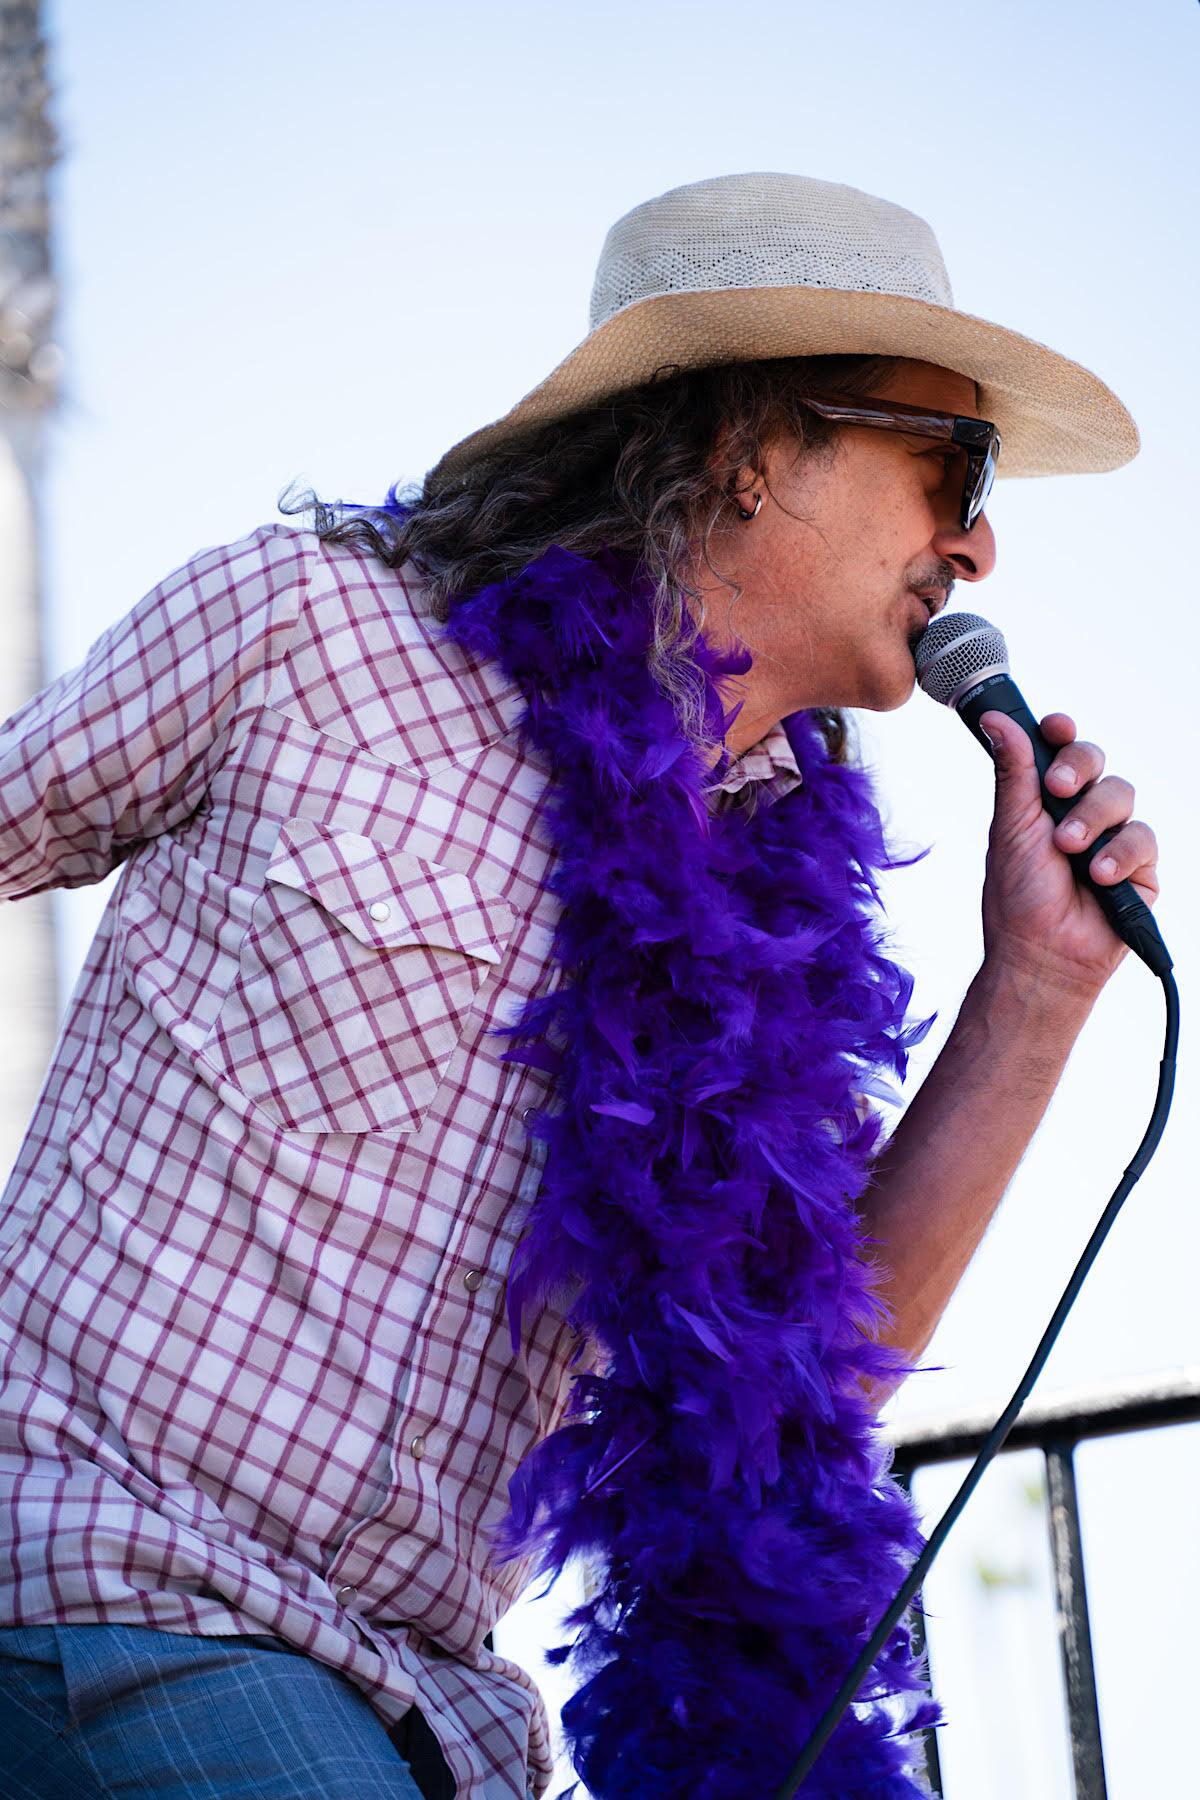 Jefferson Jay, a popular music producer and entertainer, will emcee the evening, wearing one of his many hats.